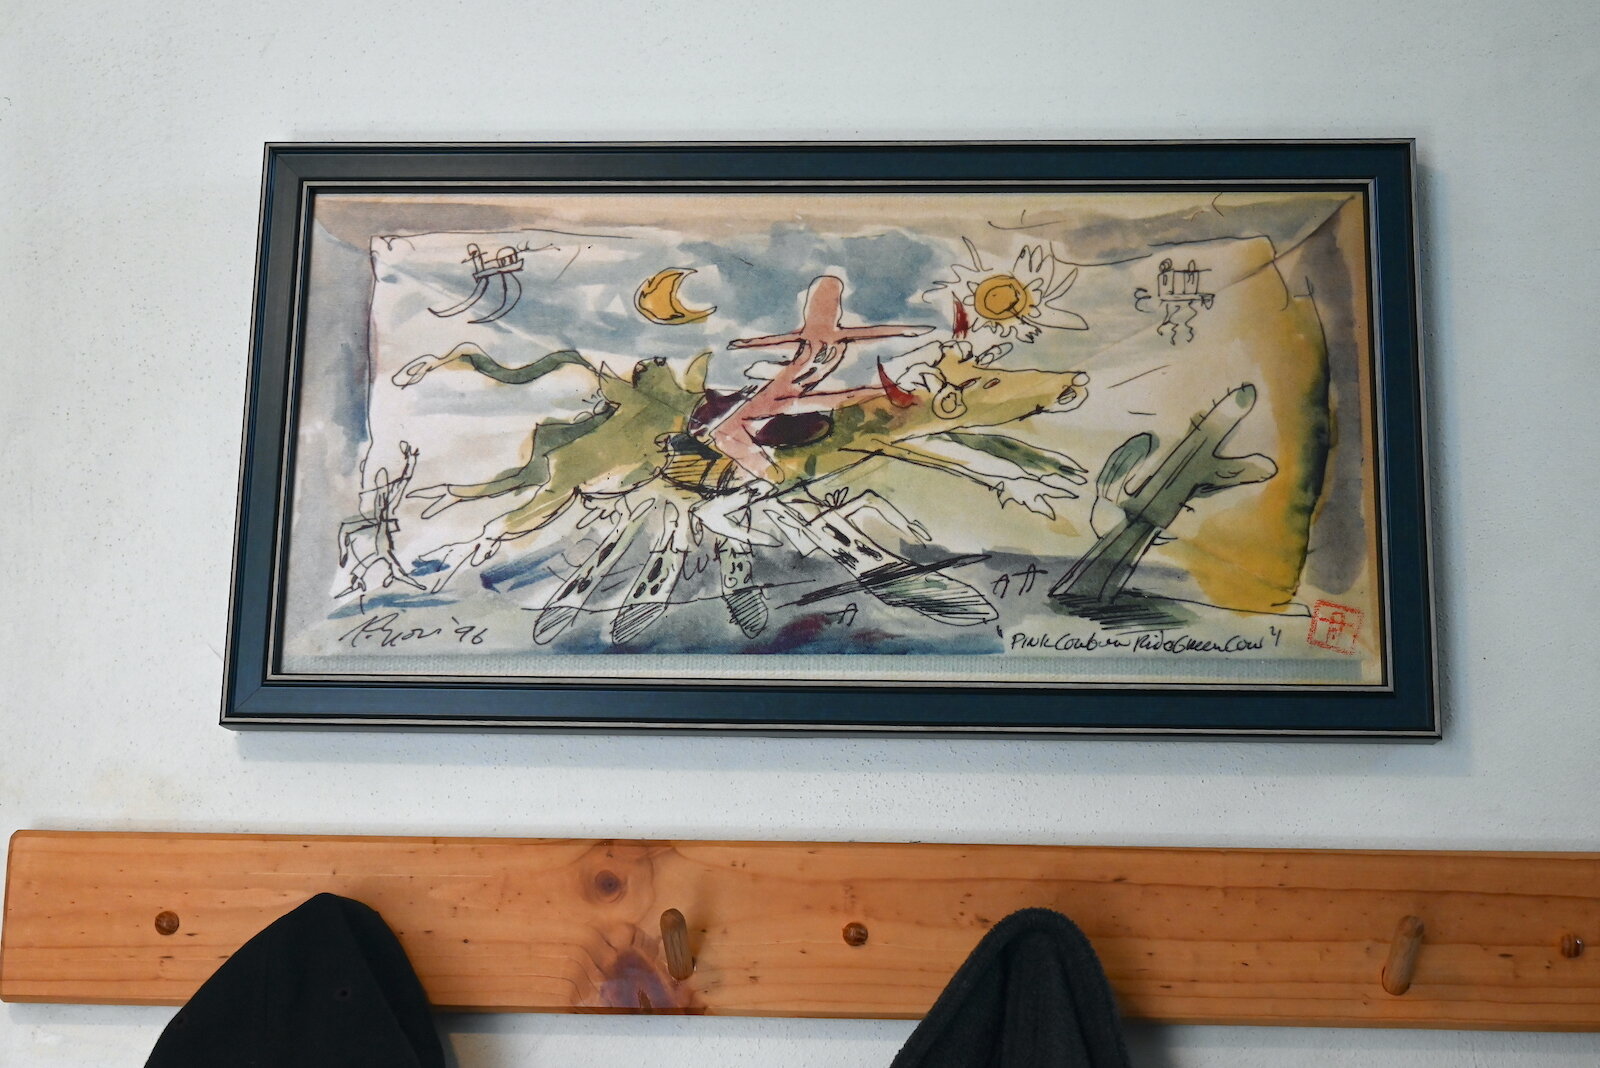 Sokuzan did this painting “Pink Cowboy Riding a Green Cow” at the SokukoJi Buddhist Temple Monastery in Battle Creek.